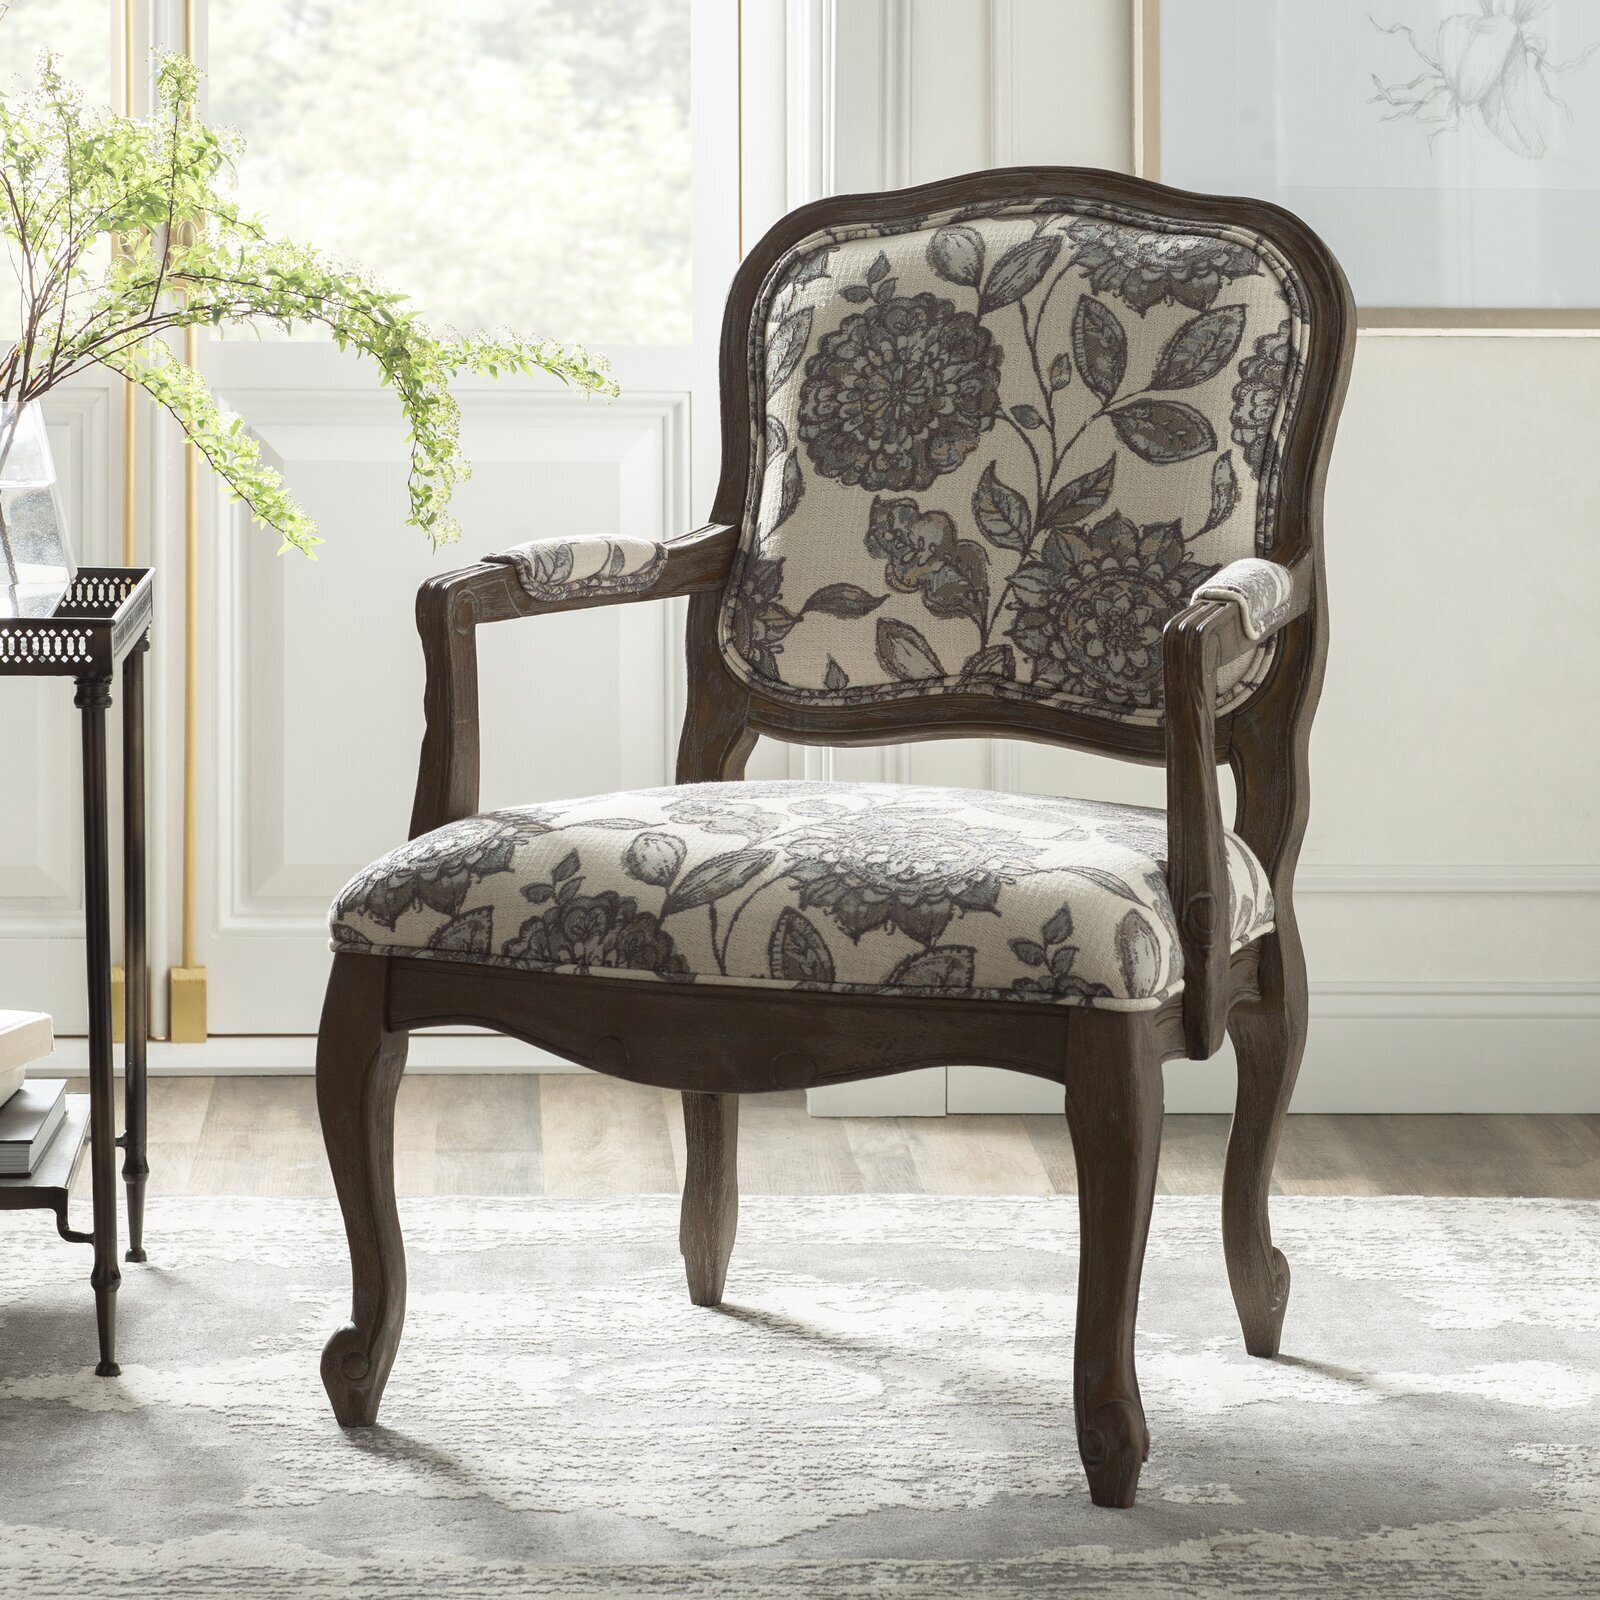 Britton Style French Provincial Chair